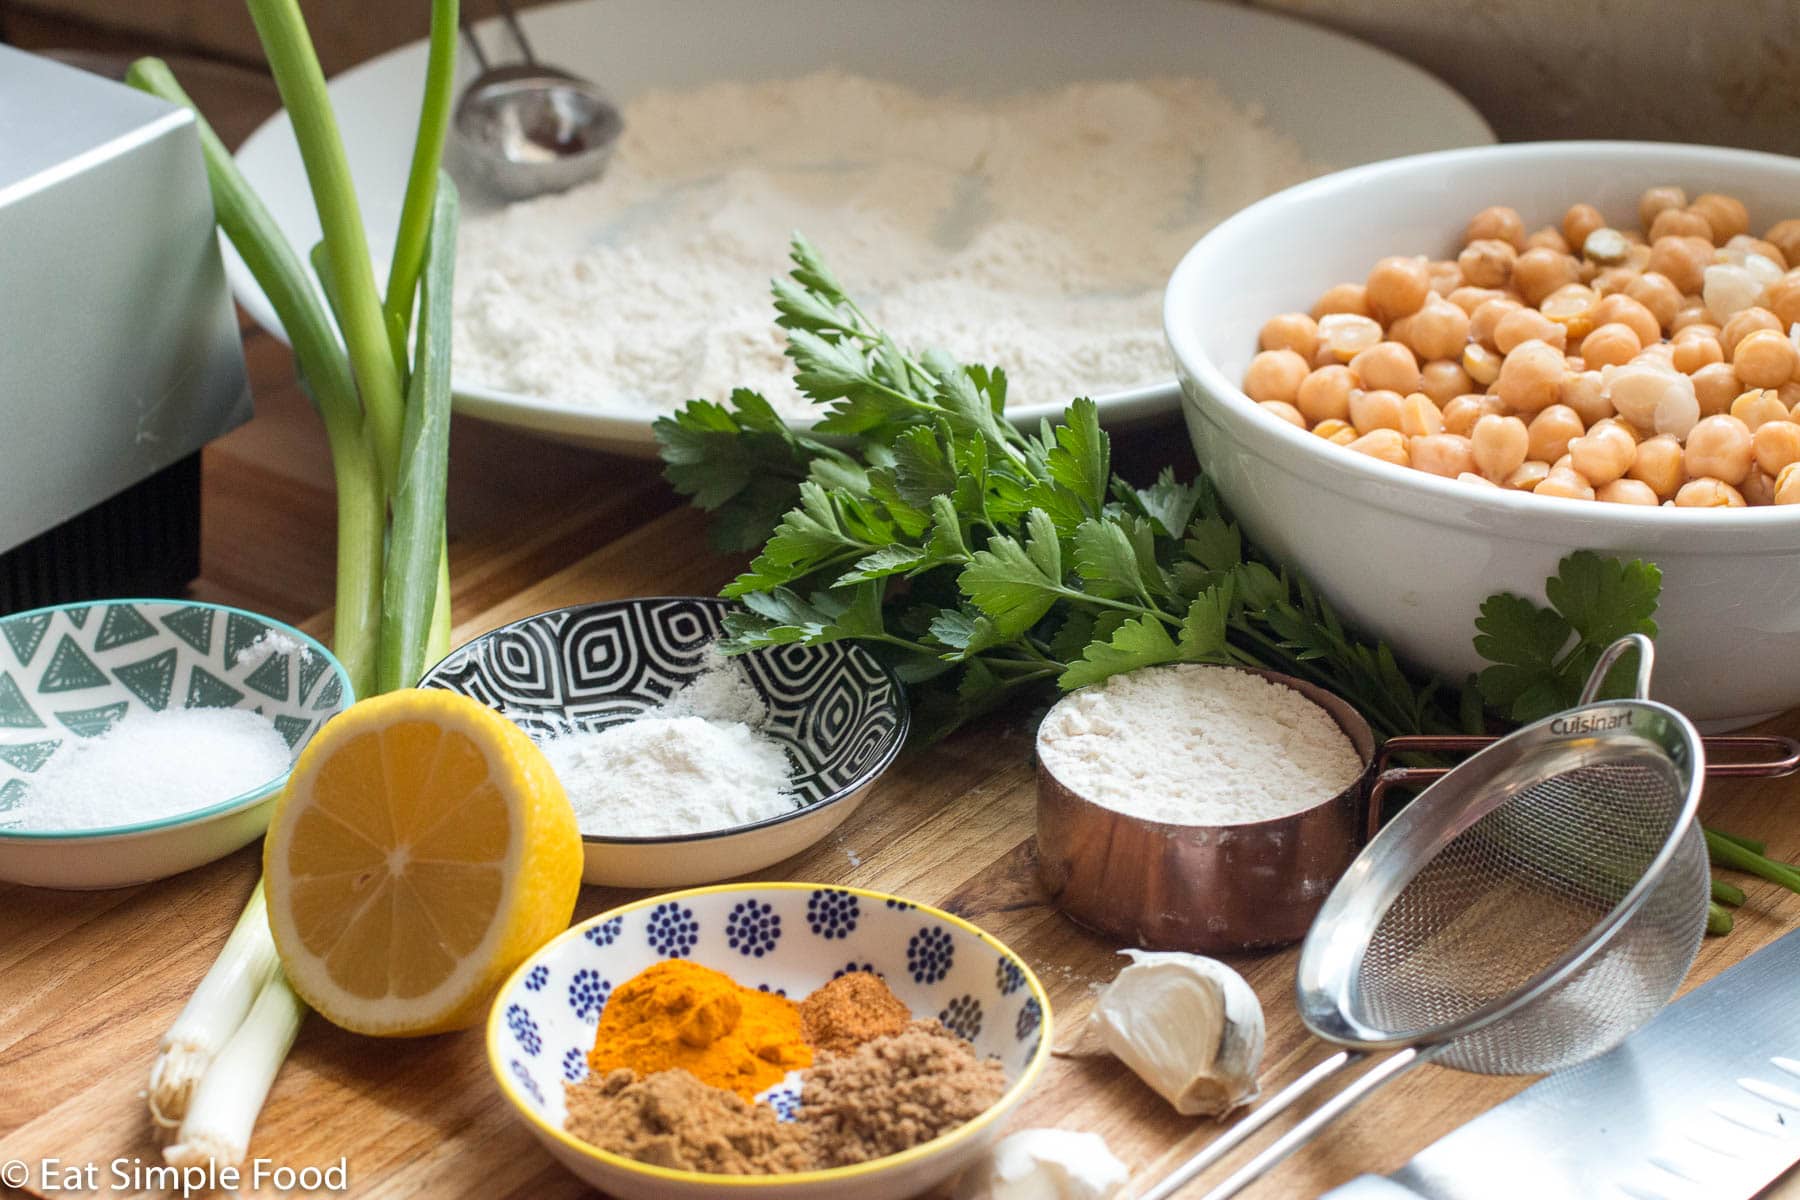 Ingredients on a wood cutting board: container of salt, baking powder, spices, measuring cup of flour, 2 cloves of garlic, bunch of parsley, white bowl of chickpeas, plate of flour, 2 green onions, ½ lemon. Side view.